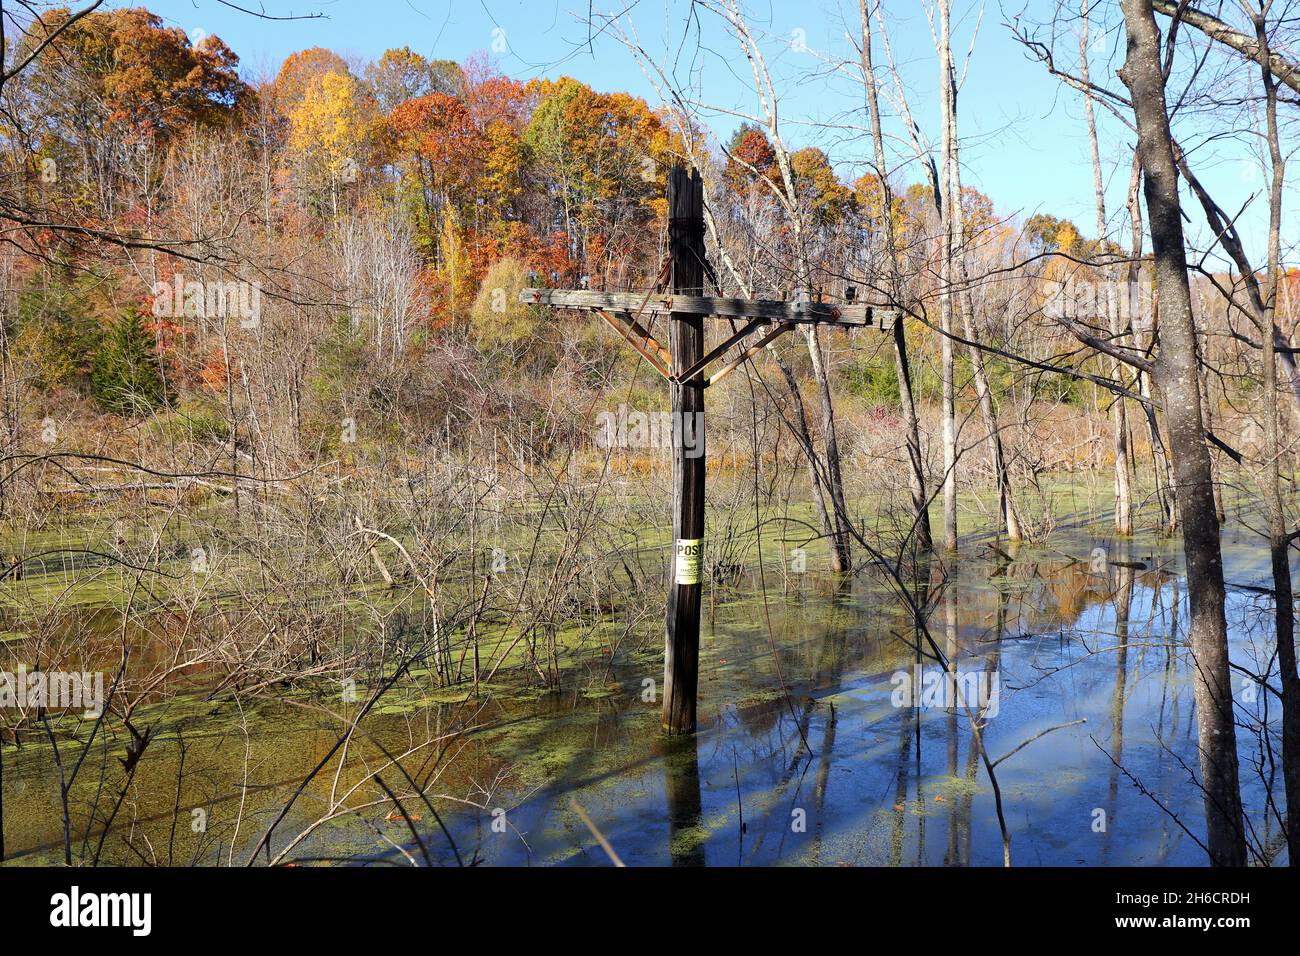 The relic of an old telephone phone in flooded wetland area on an autumn day, Poughkeepsie, New York. Stock Photo